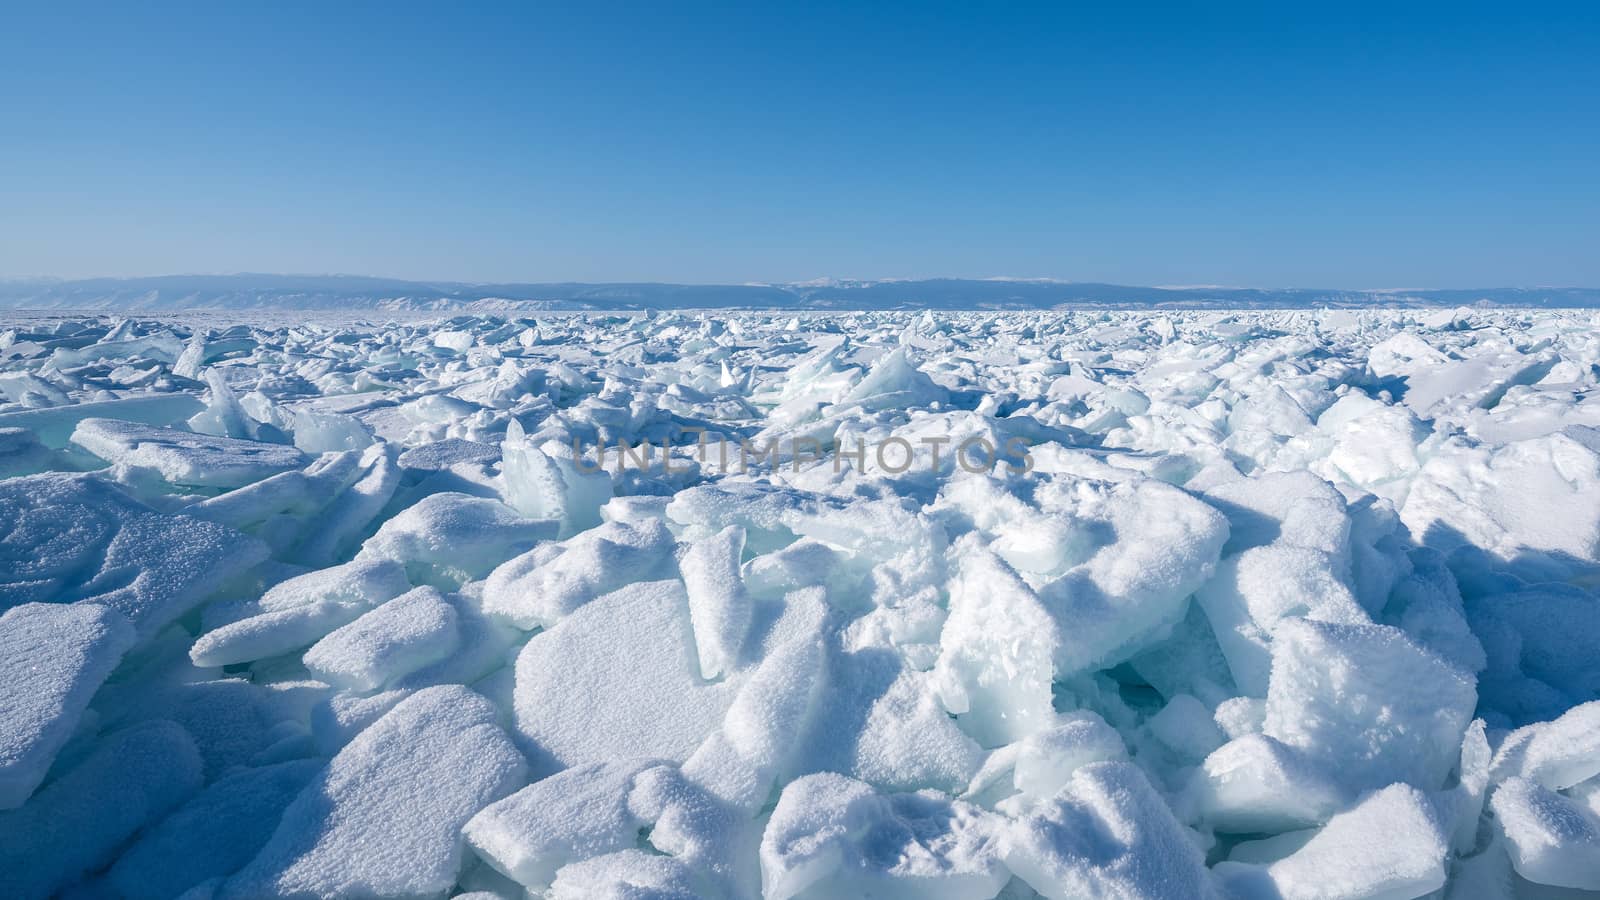 Fields of ice hummocks with heaps of large blocks of ice. by chadchai_k